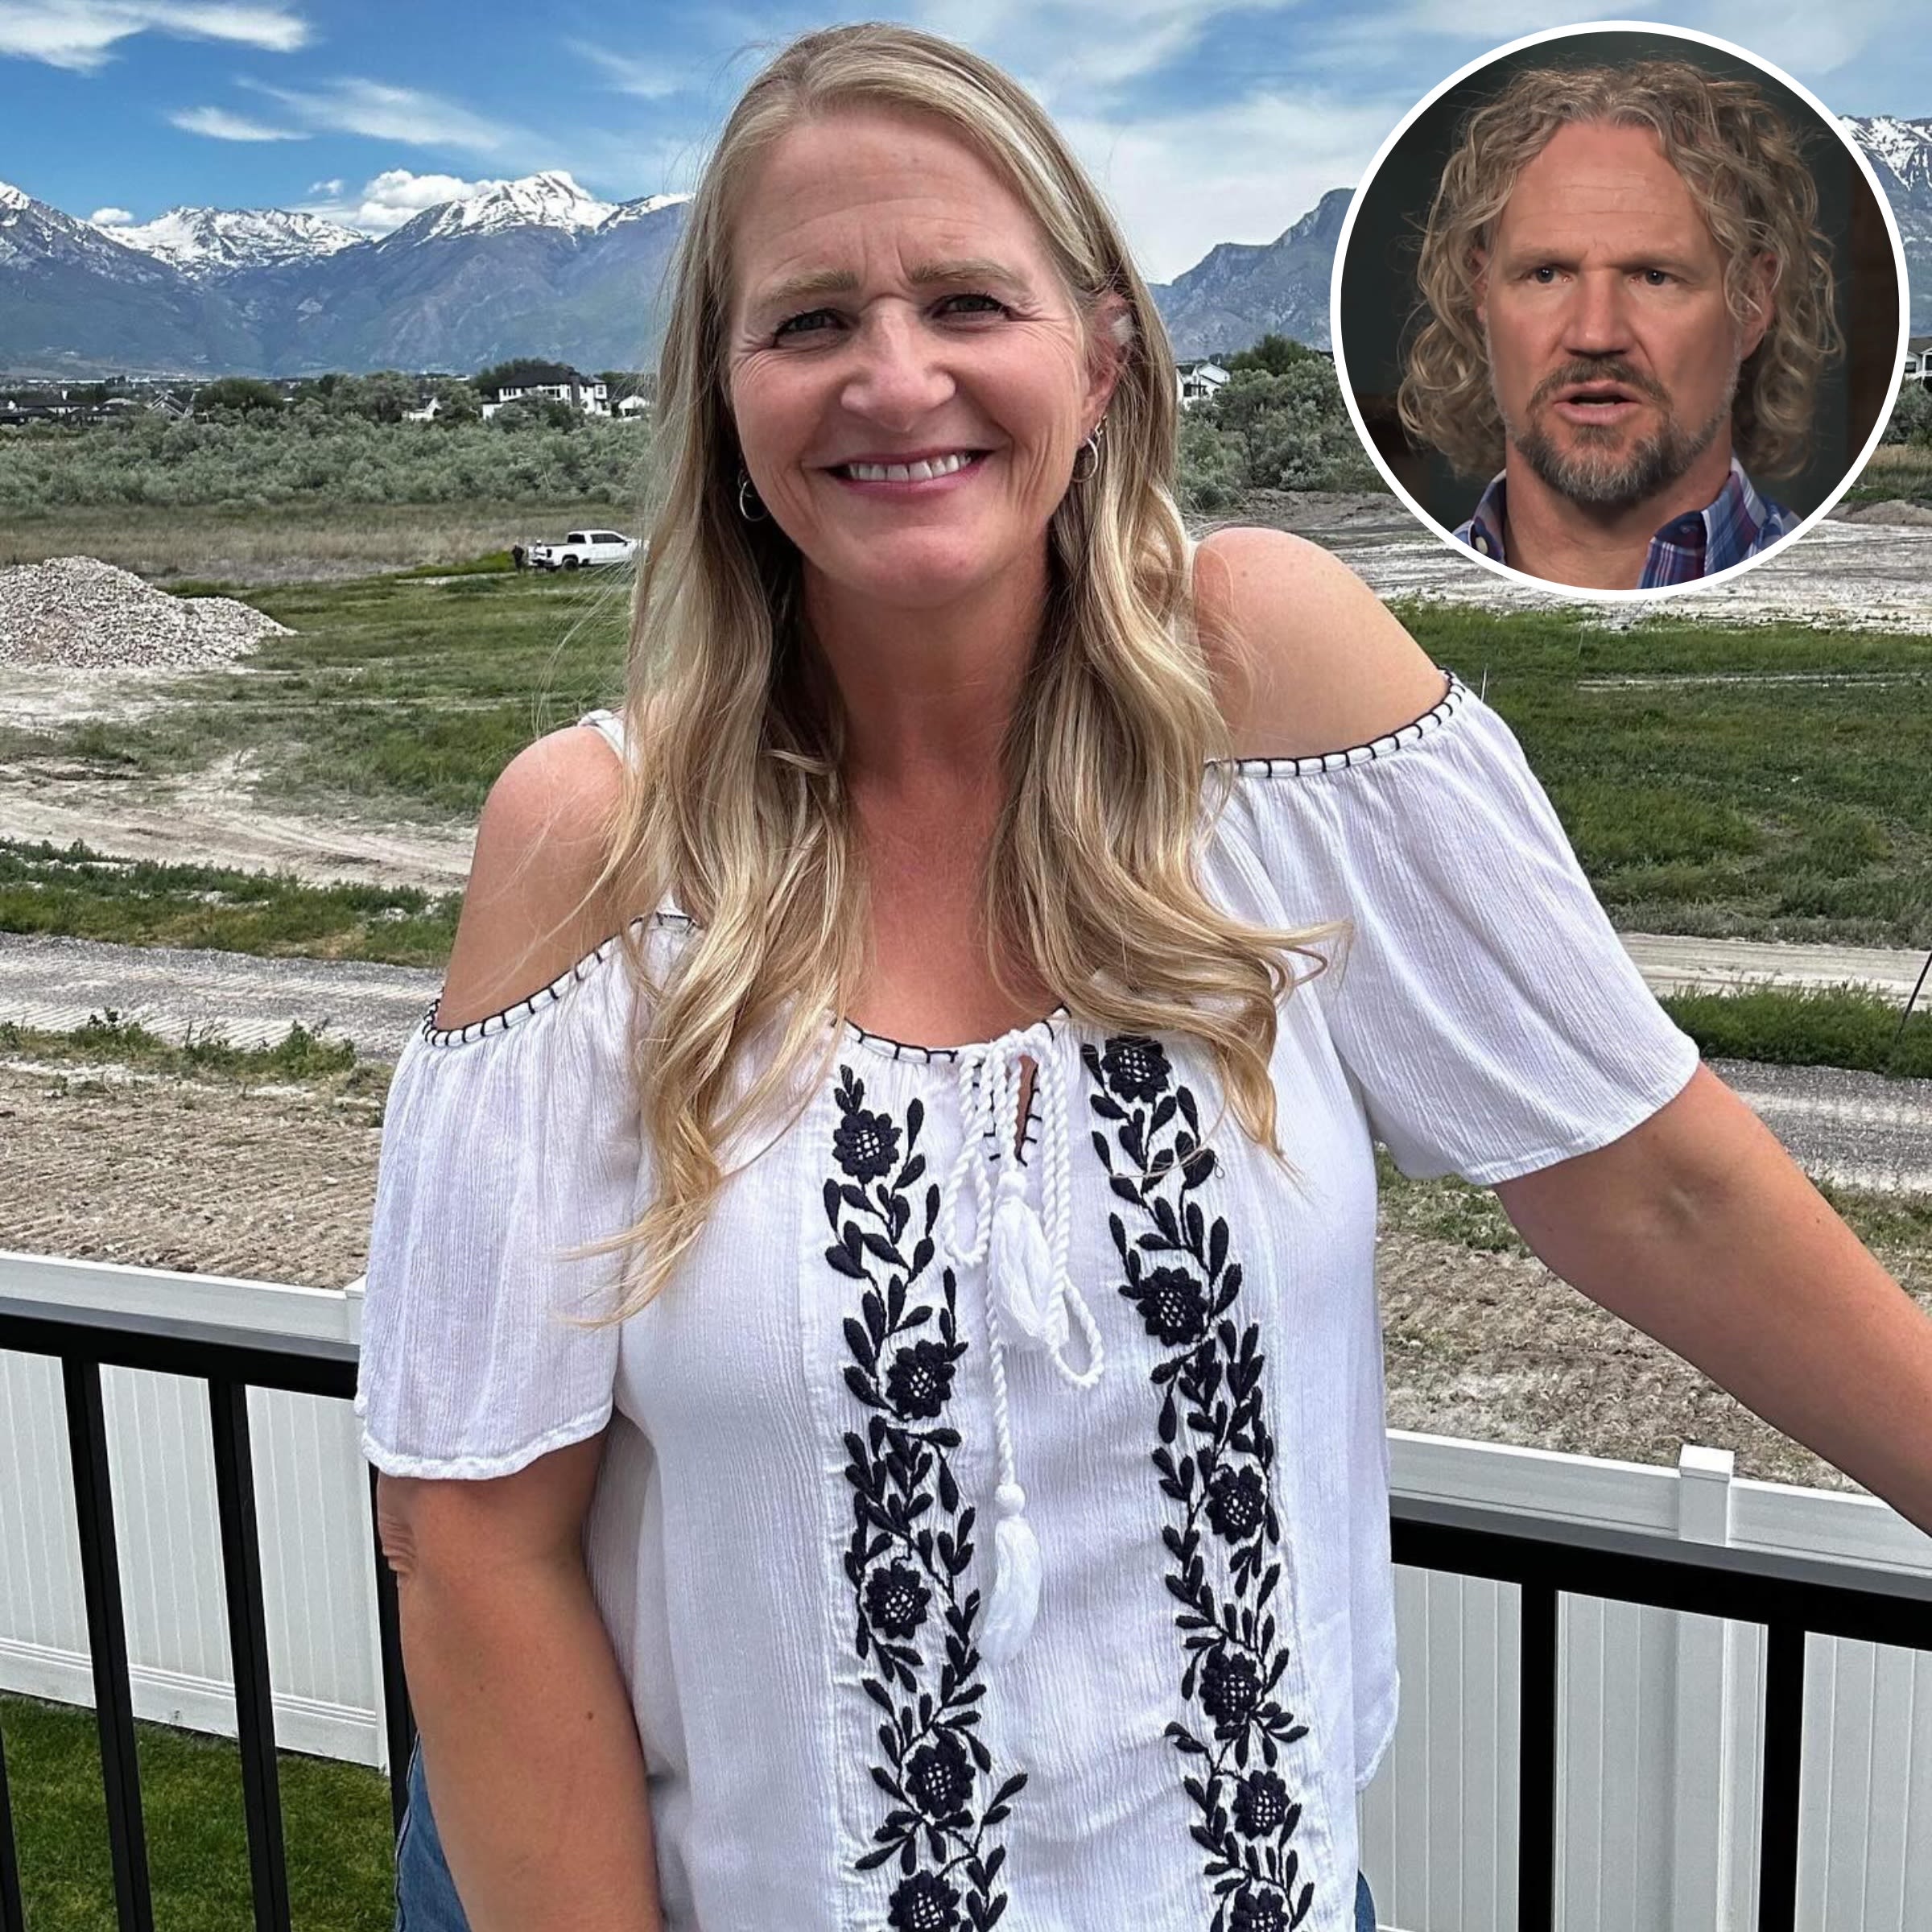 Sister Wives’ Christine Brown Encourages ‘Scary’ Change After Split From Kody Brown: ‘Step Out’